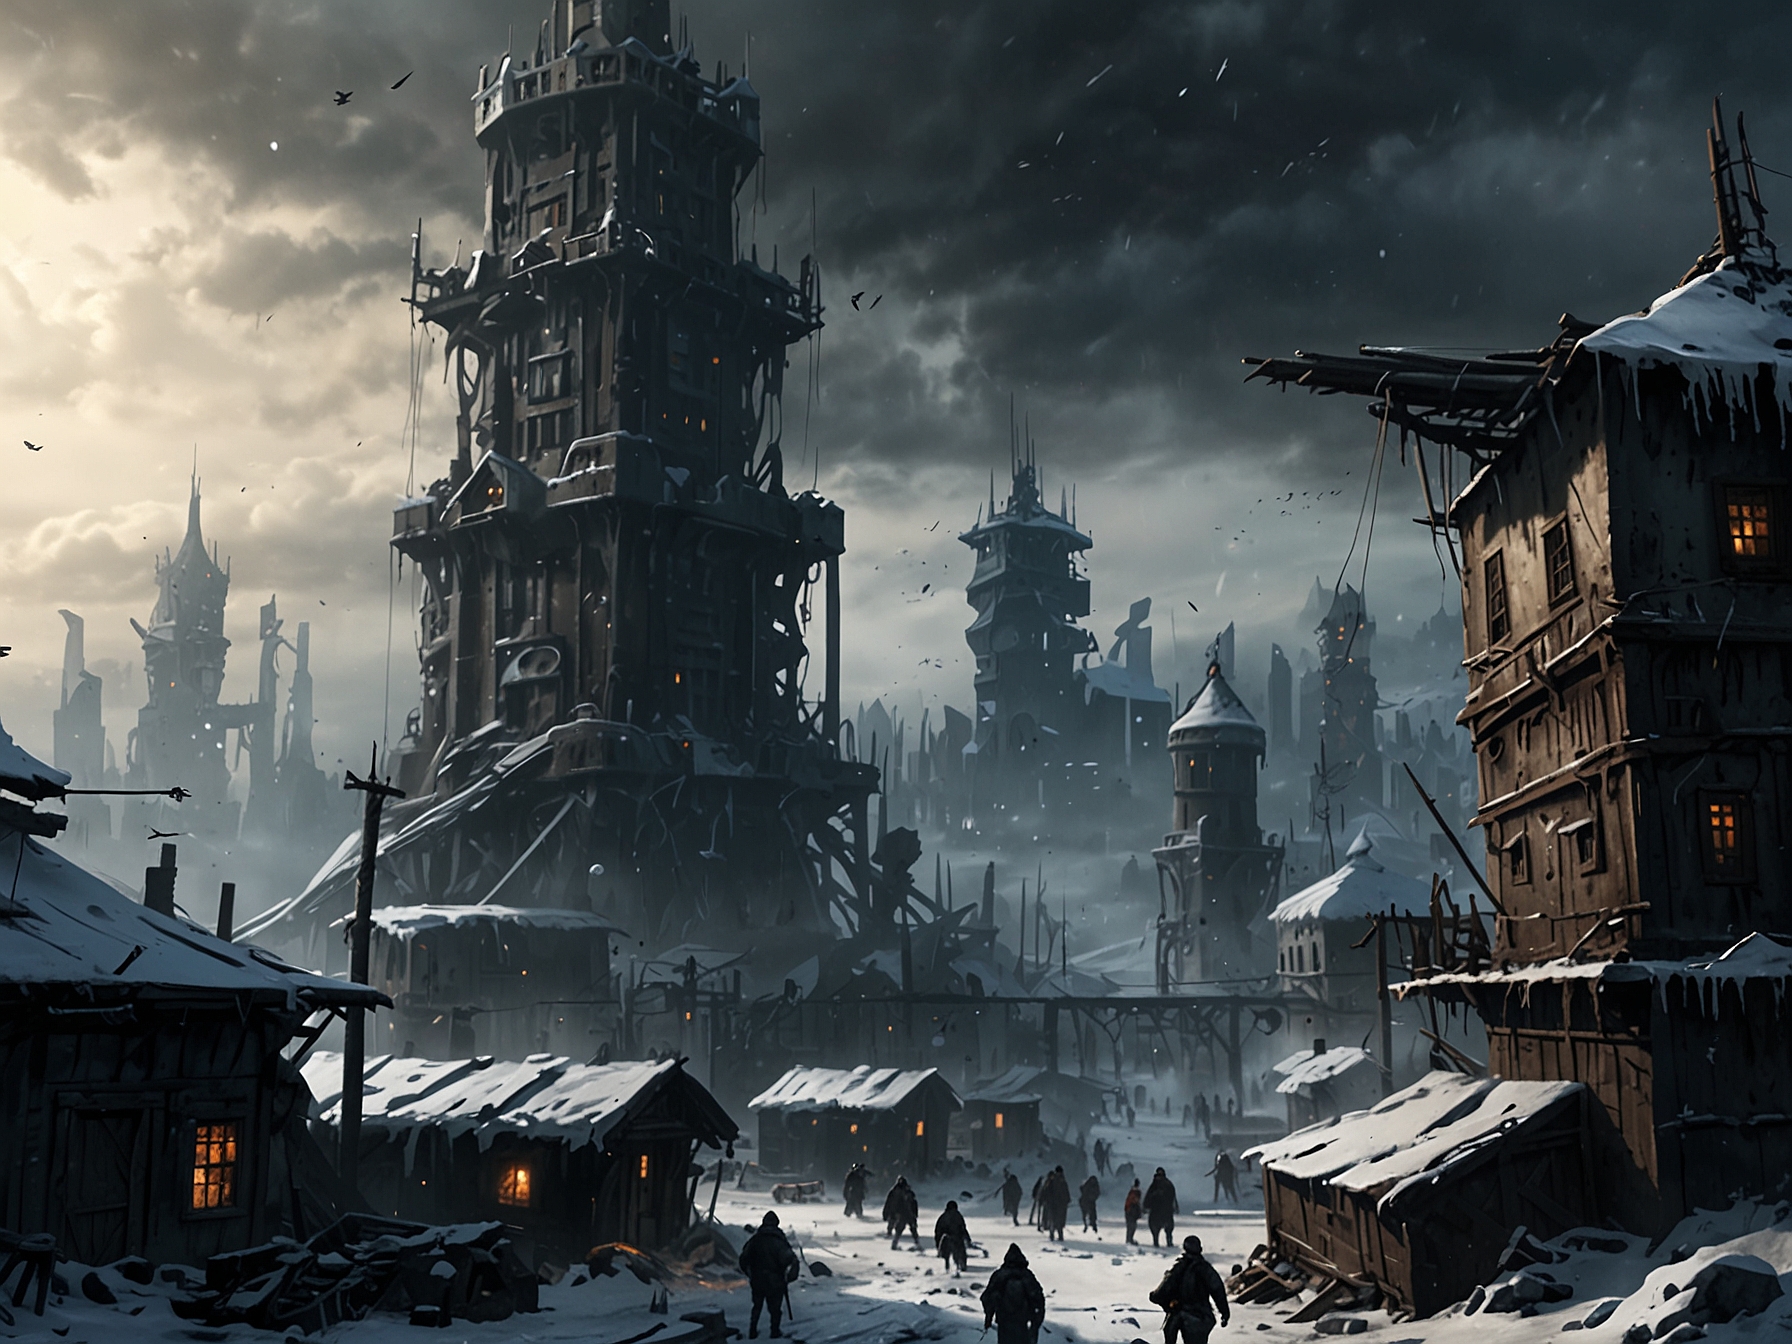 An icy, post-apocalyptic cityscape with towering structures and citizens bustling around, reflecting the harsh and unforgiving environment of Frostpunk 2.